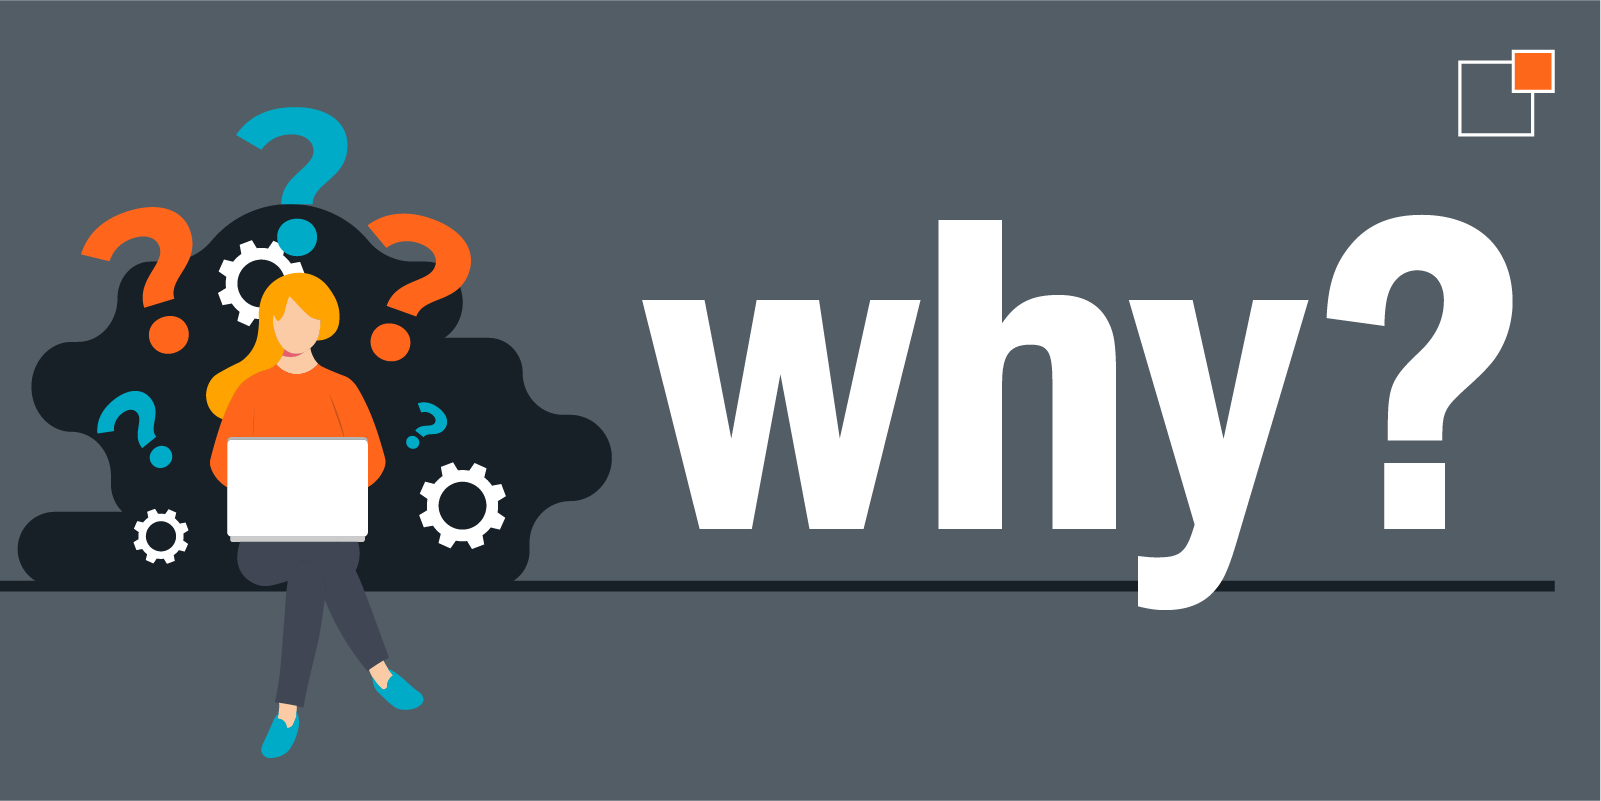 the word "why" next to a girl on a laptop surrounded by question marks